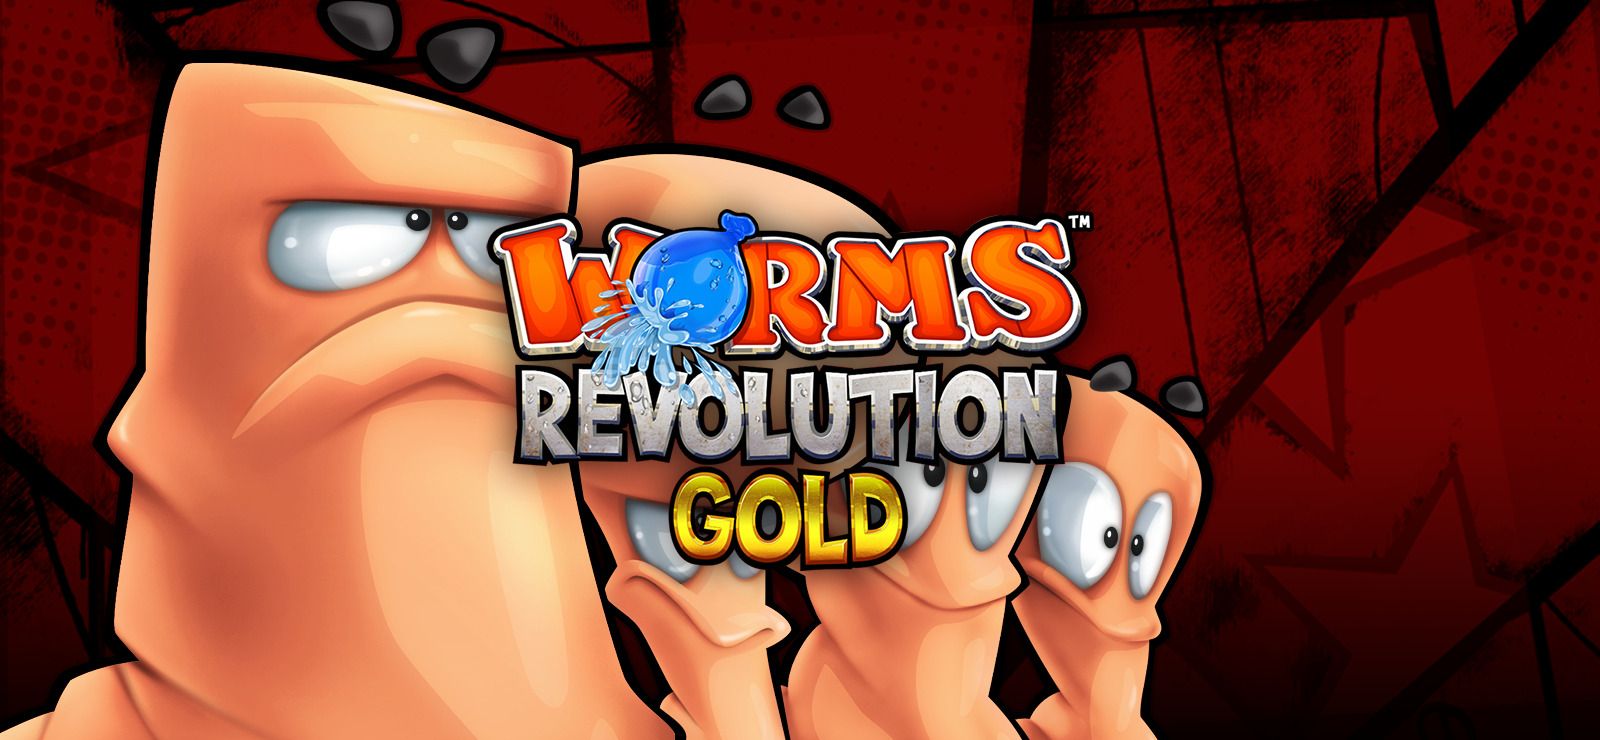 worms-revolution-gold-edition-free-gog-game-giveaway-grabfreegames